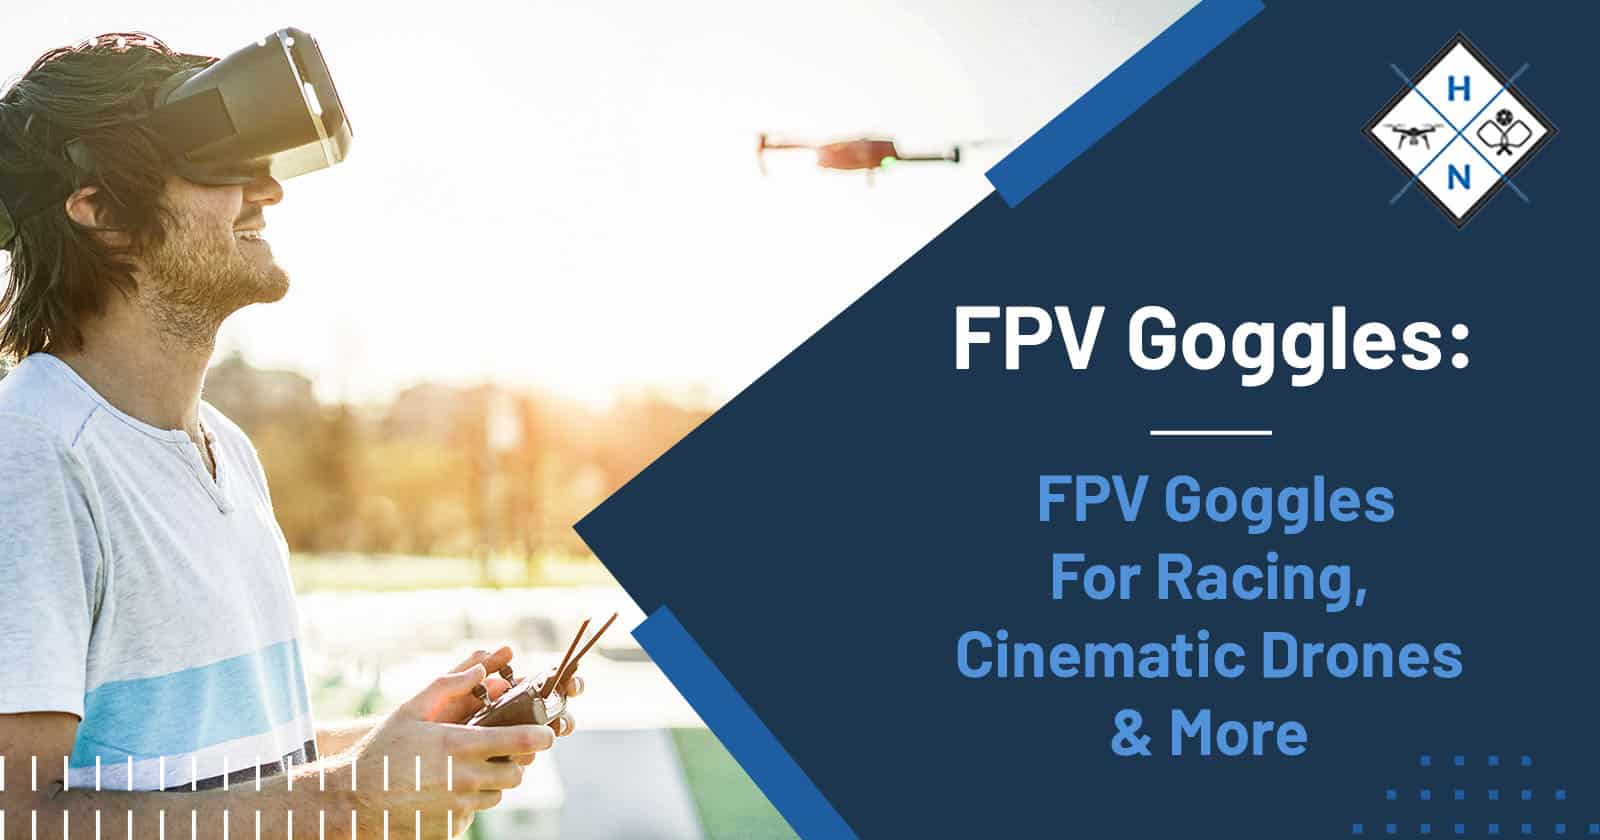 FPV Goggles: FPV Goggles For Racing, Cinematic Drones &#038; More